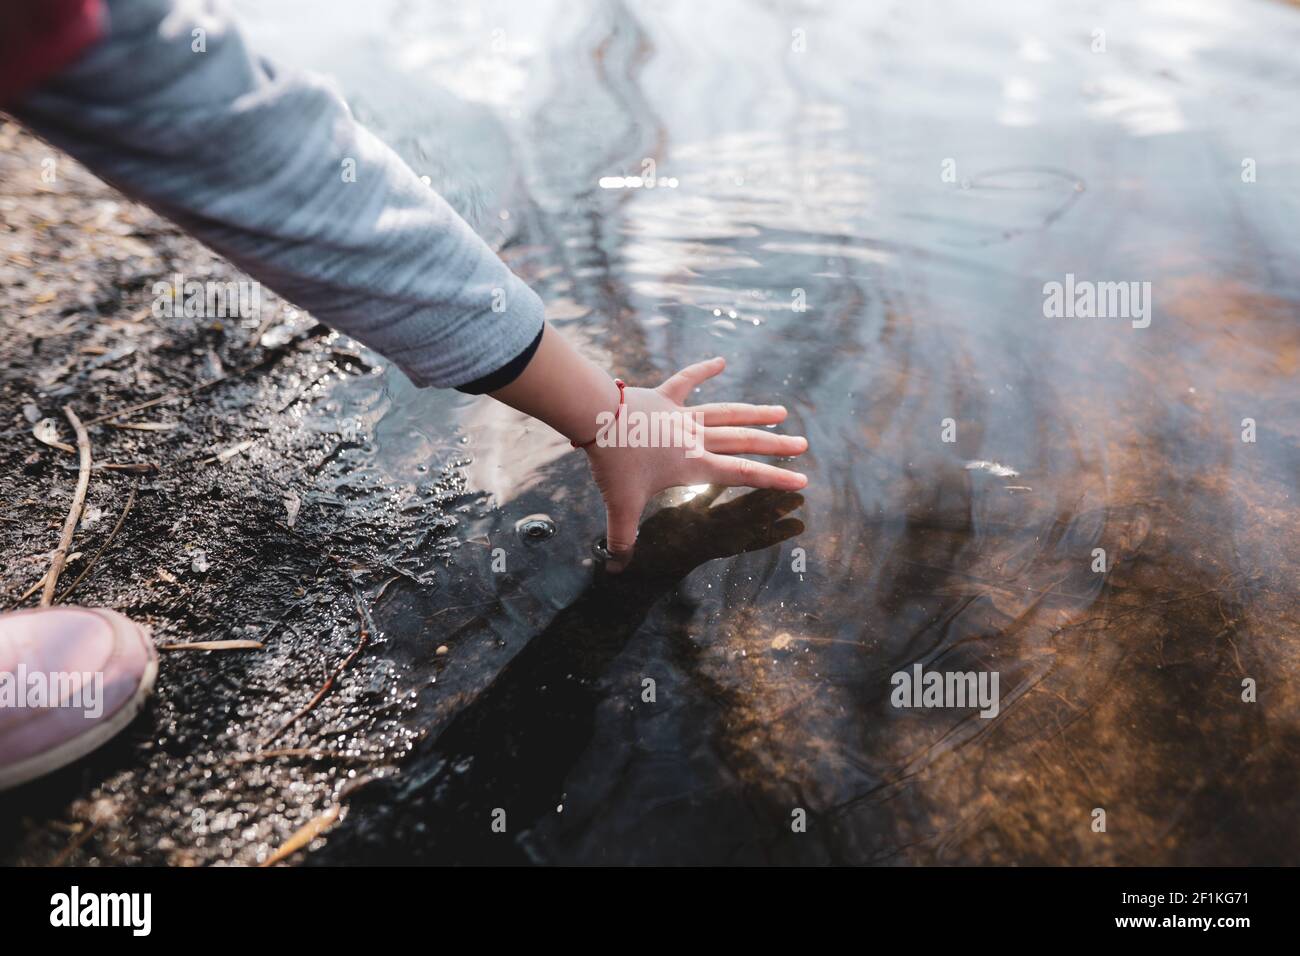 Shallow depth of field (selective focus) details with the hand of a young girl playing with her hand in the shallow water of a lake. Stock Photo